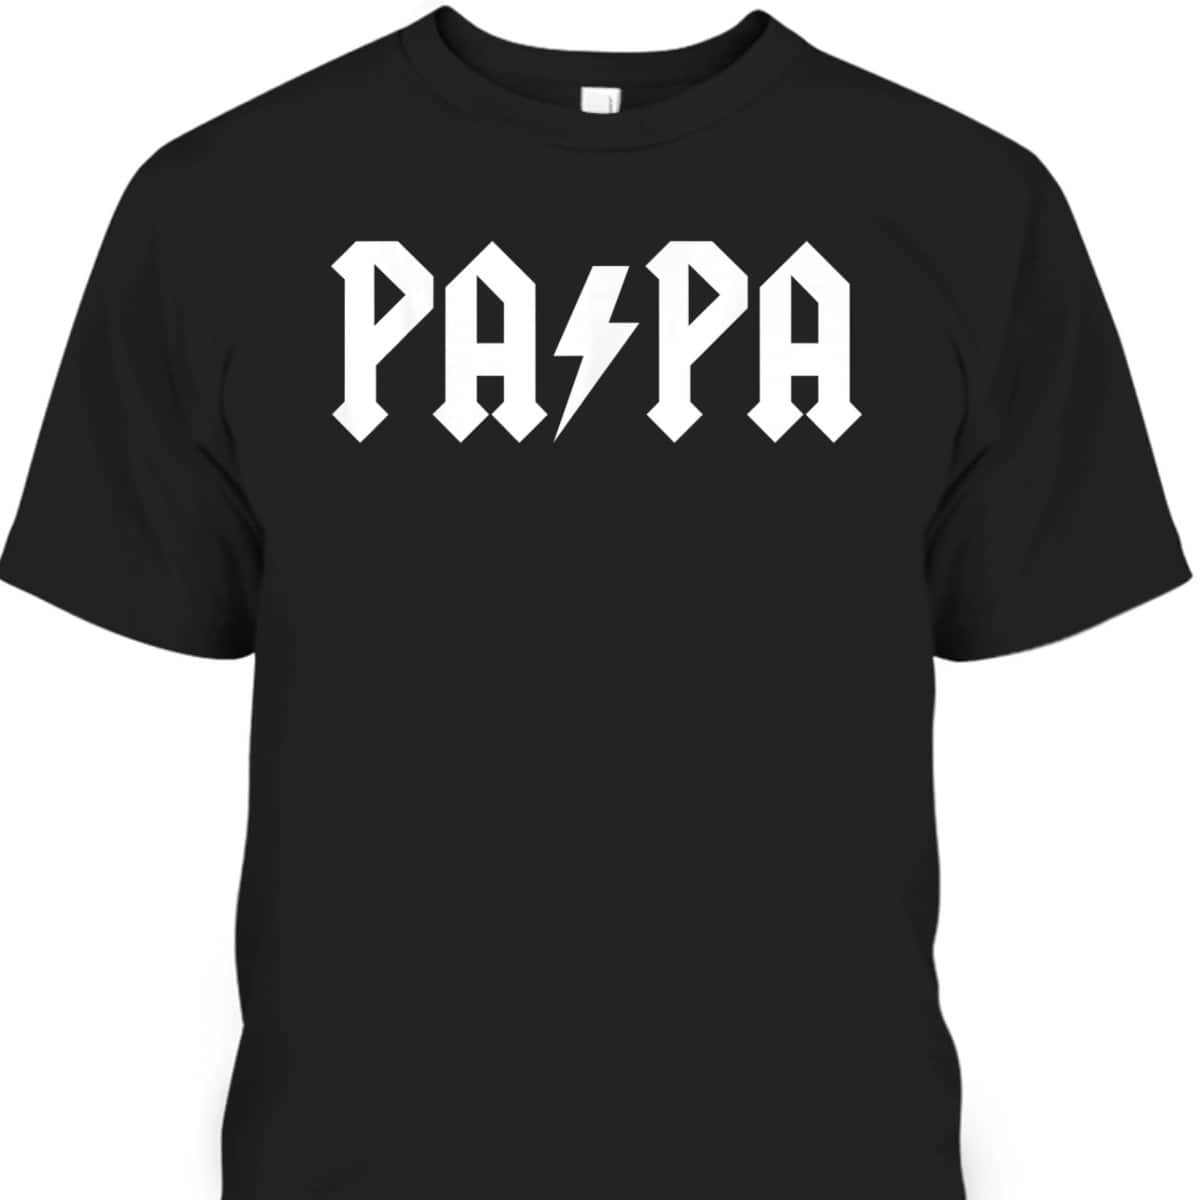 Papa Father's Day T-Shirt Best Gift For Dad From Daughter